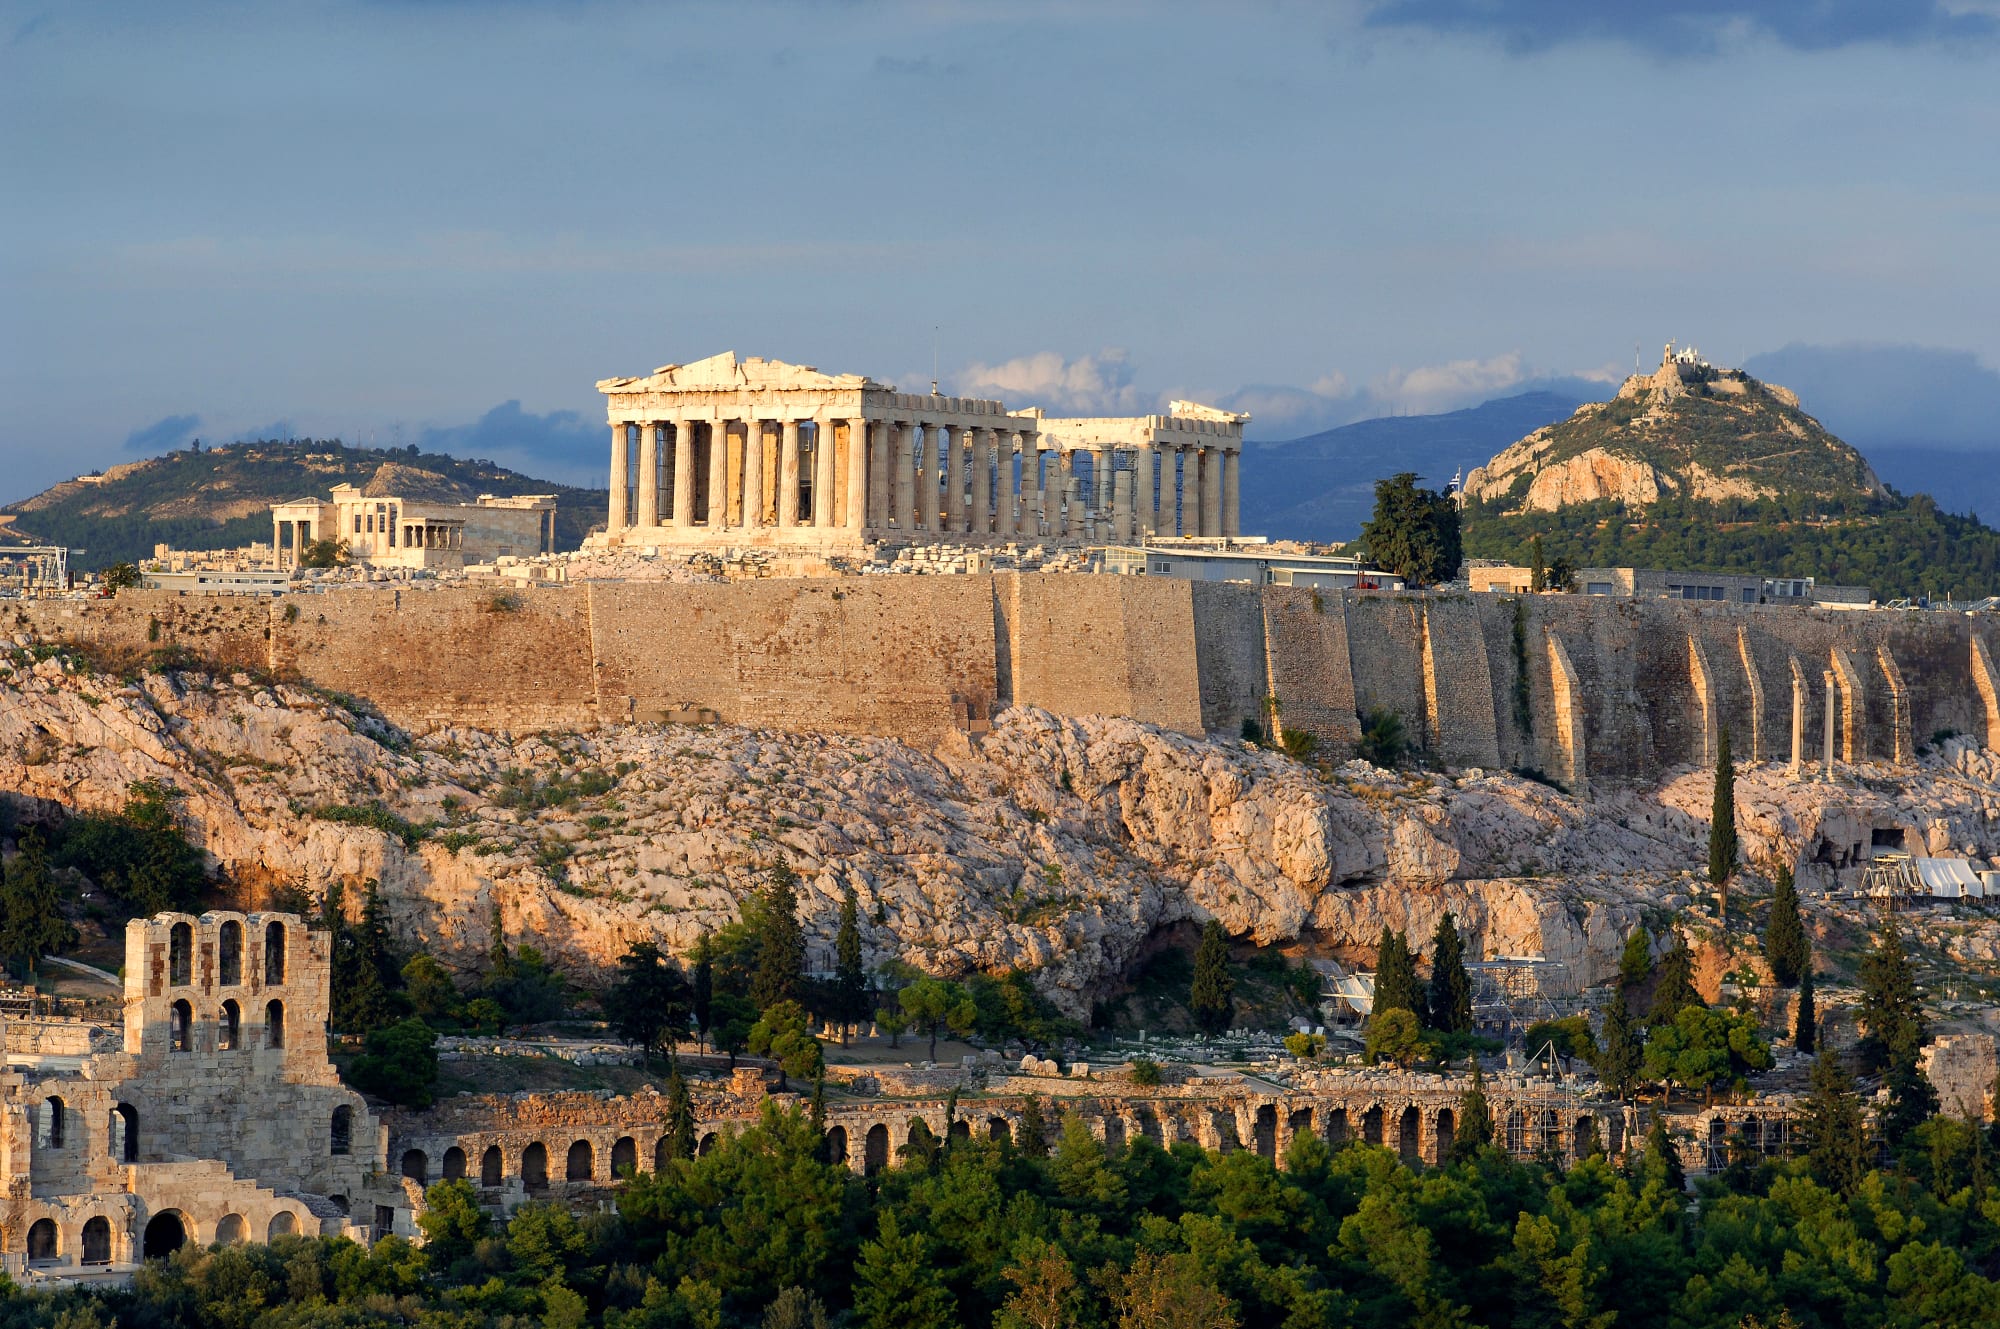 Who was the ruler of Athens during its Golden Age?